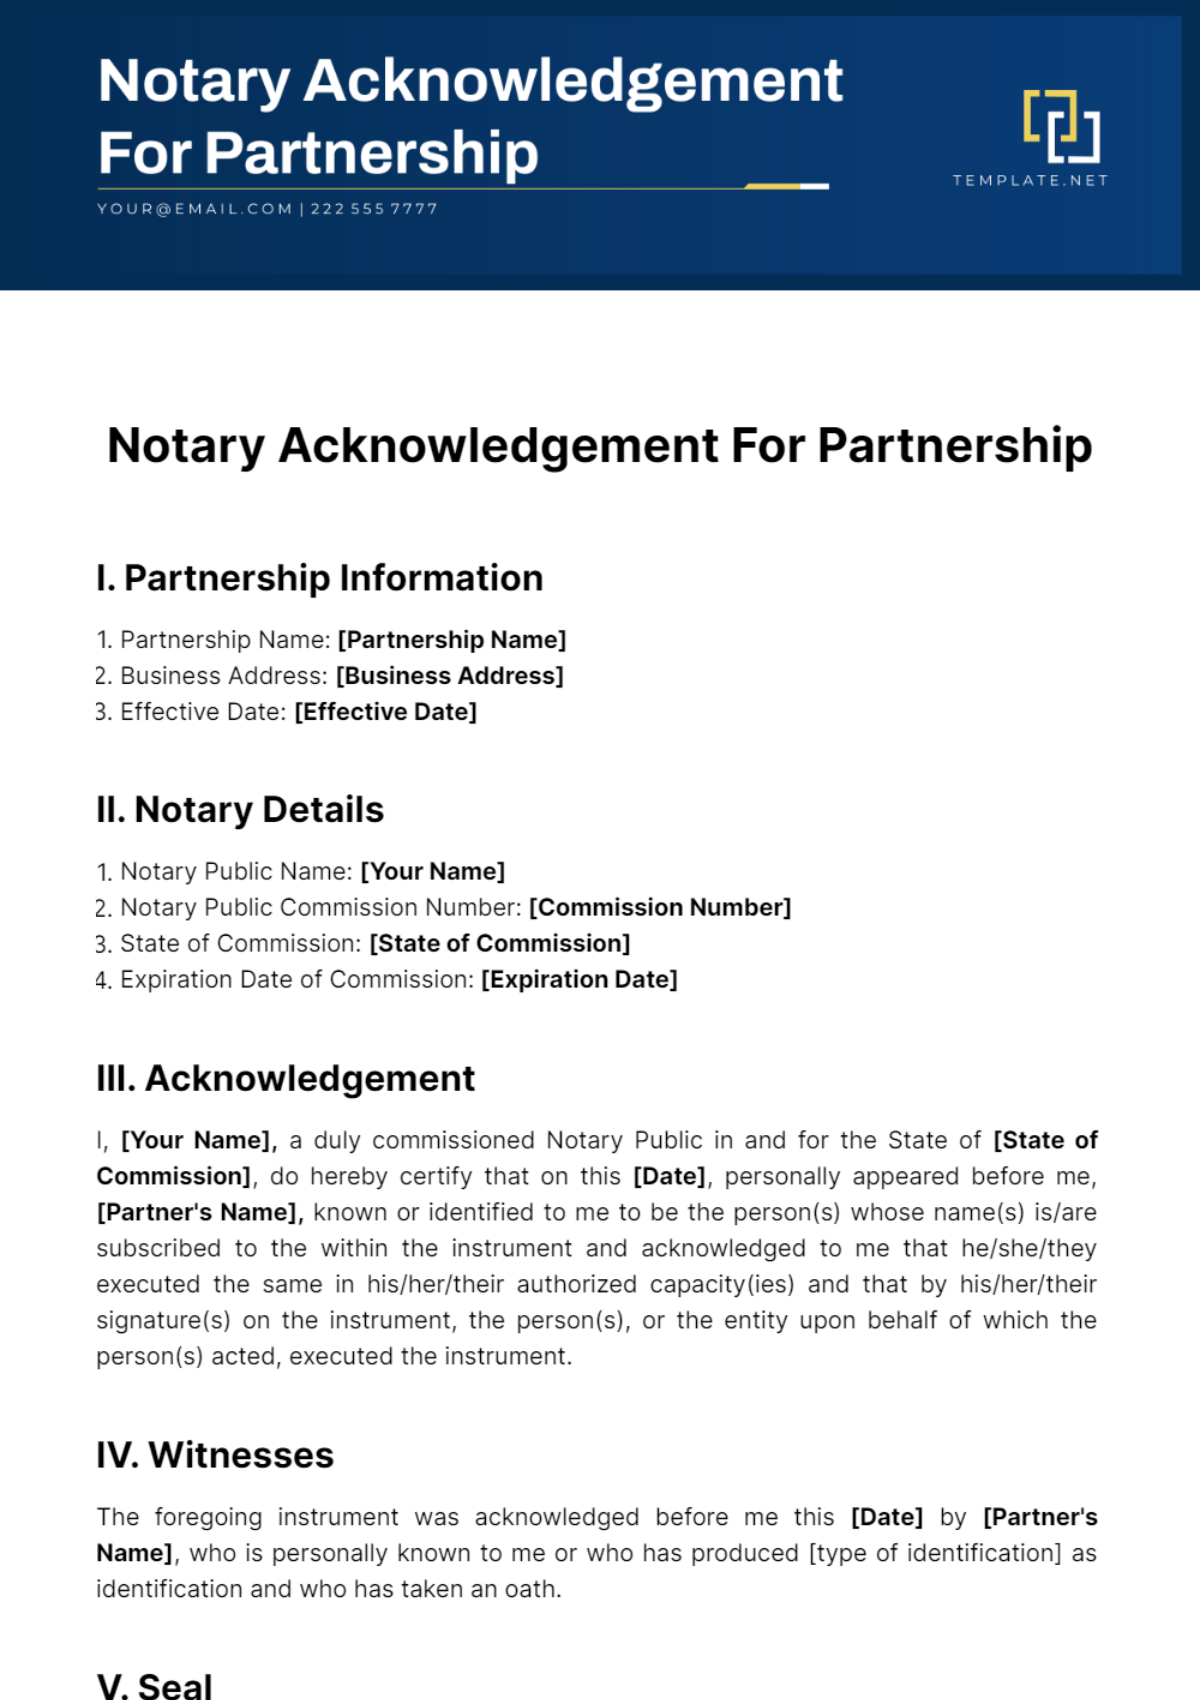 Free Notary Acknowledgement For Partnership Template